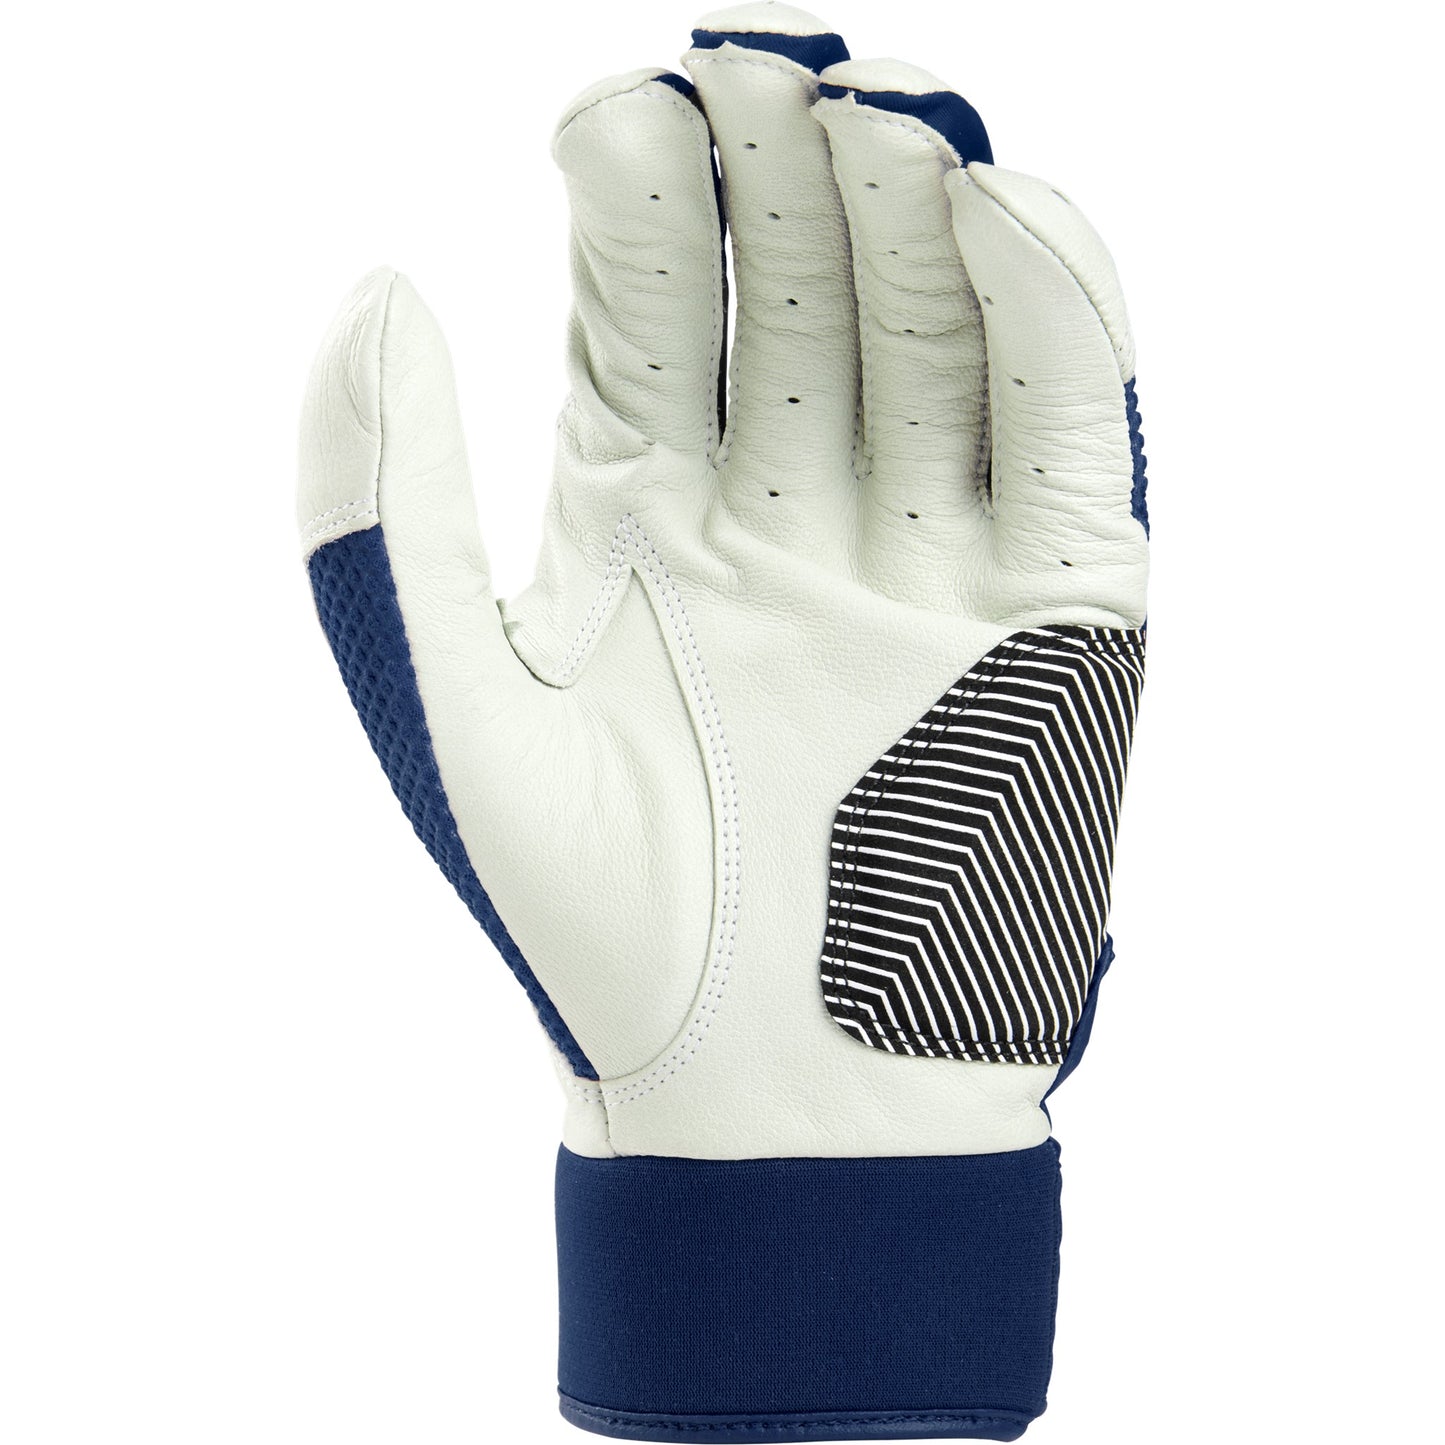 Rawlings (WH22BG) Workhorse Series Batting Gloves (pair) - ADULT SIZE